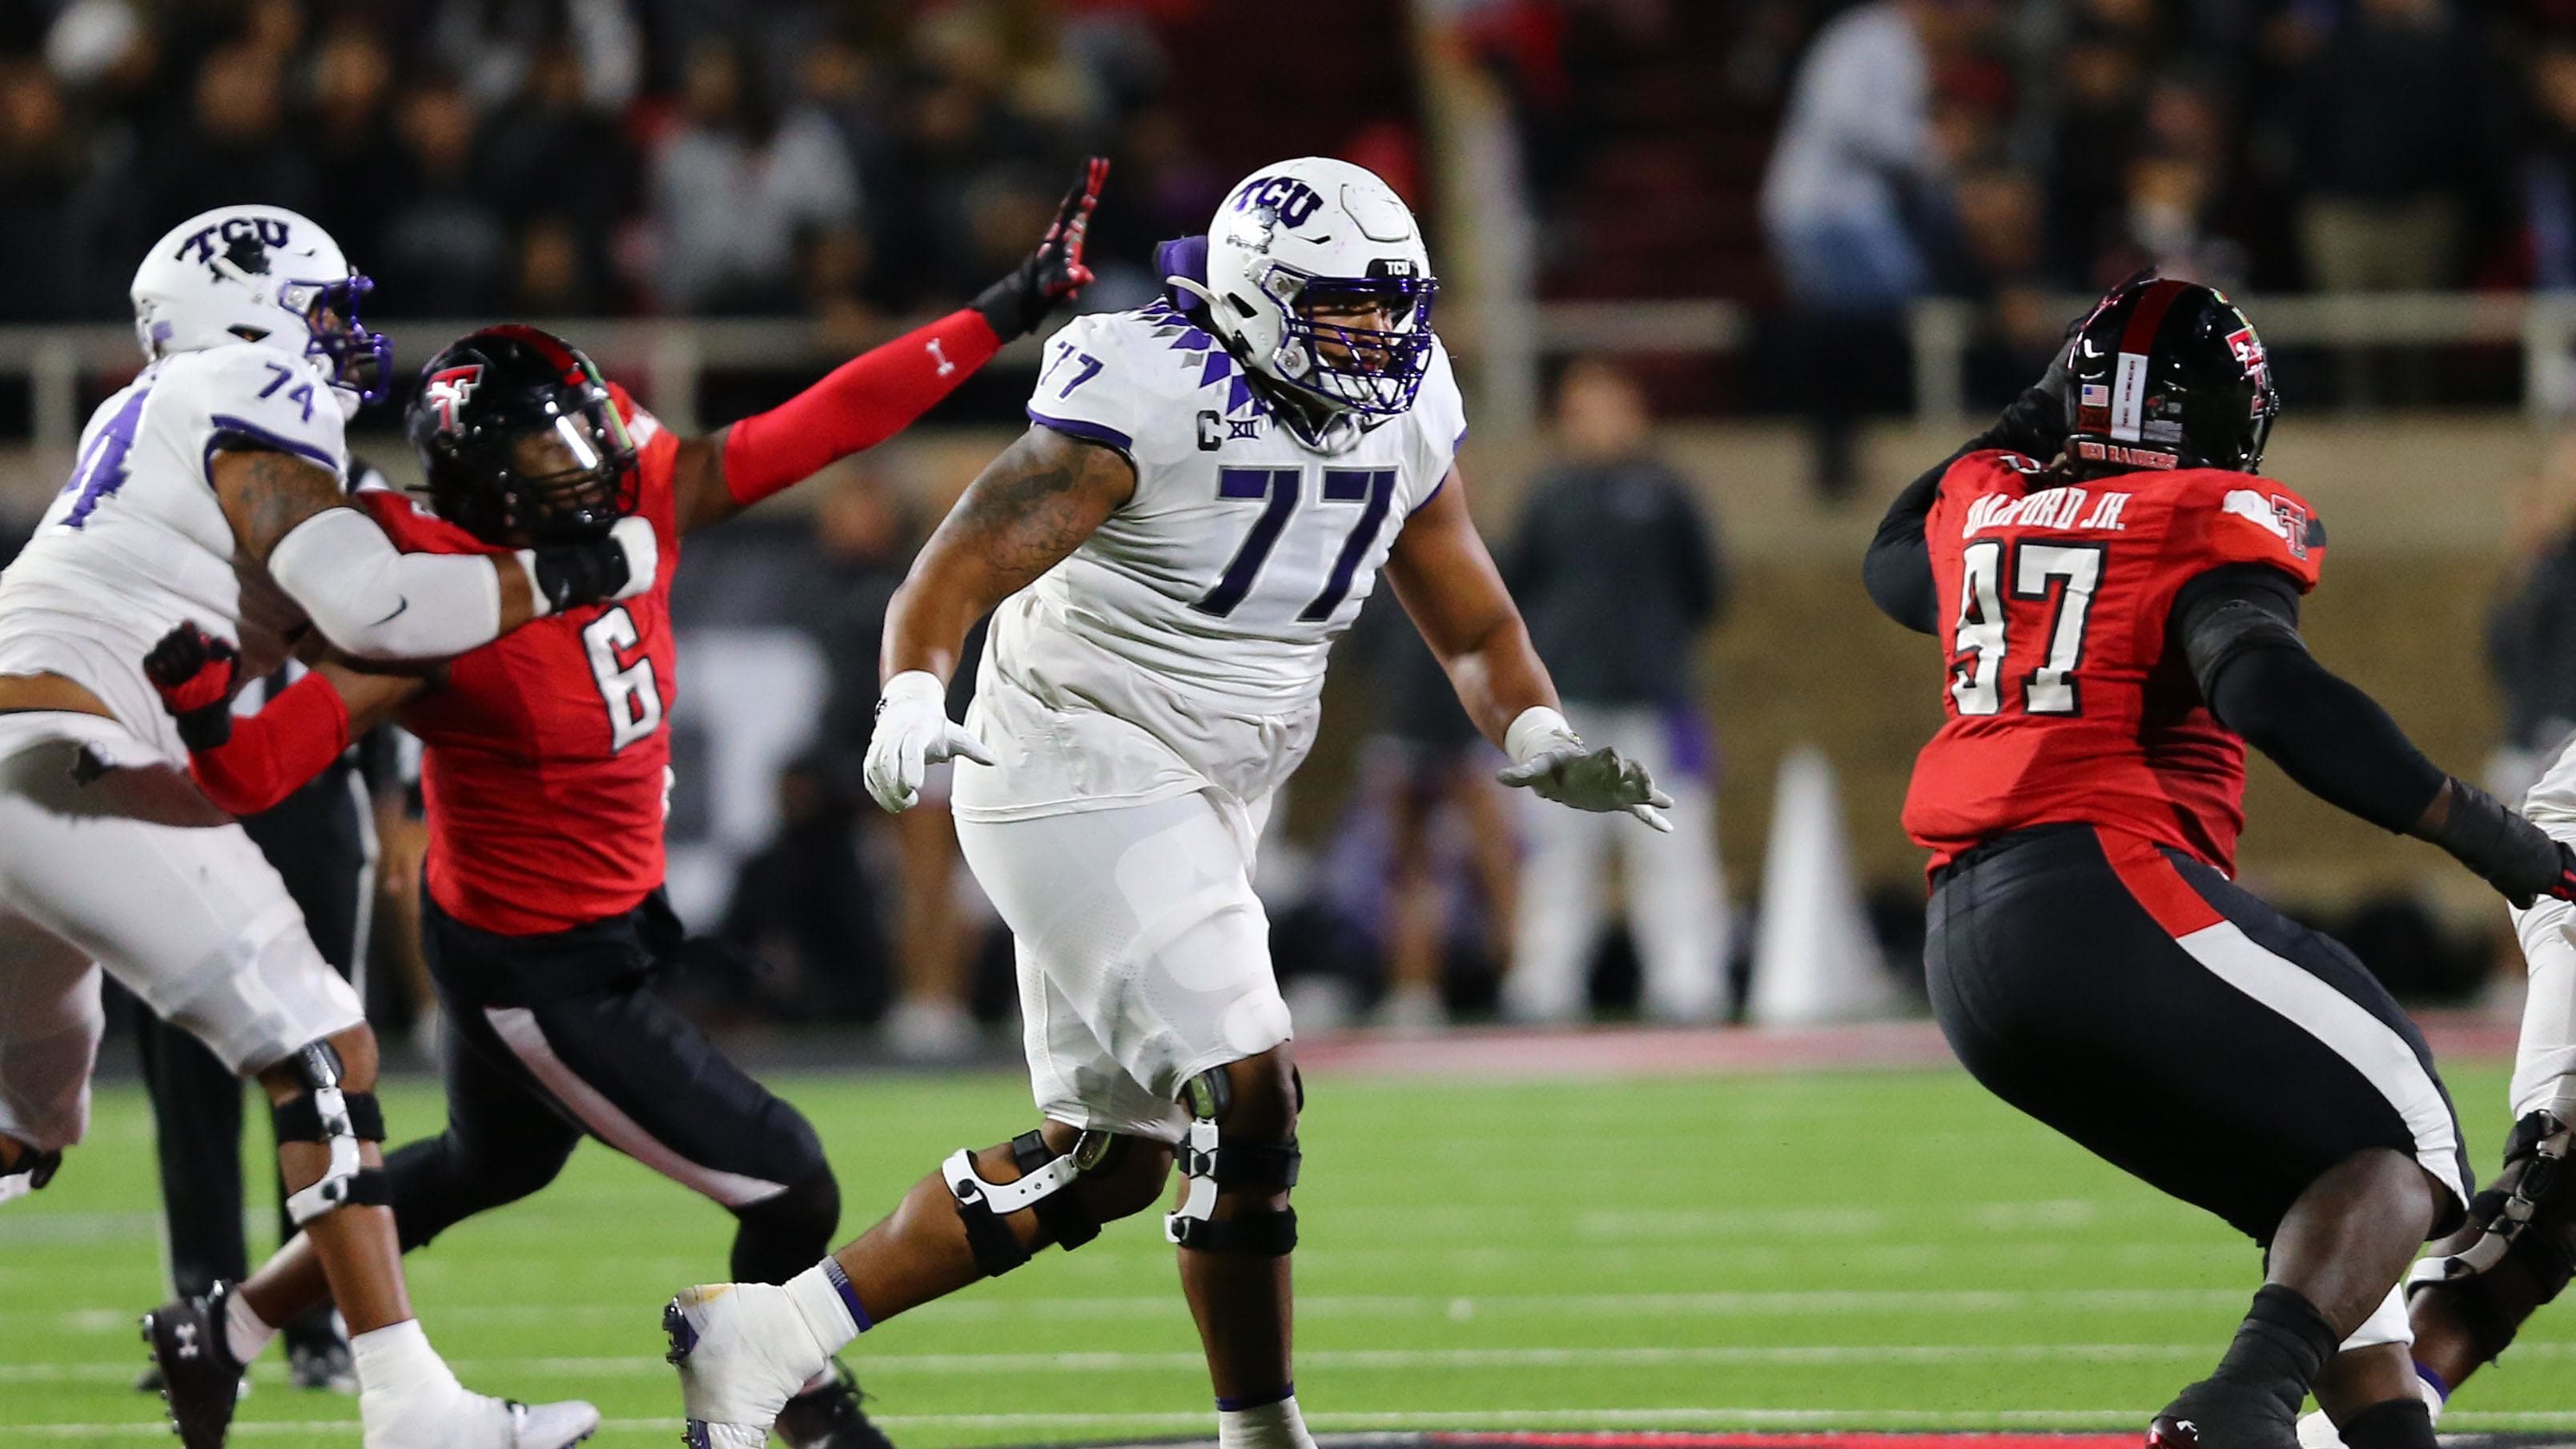  Texas Christian Horned Frogs offensive tackle Brandon Coleman.